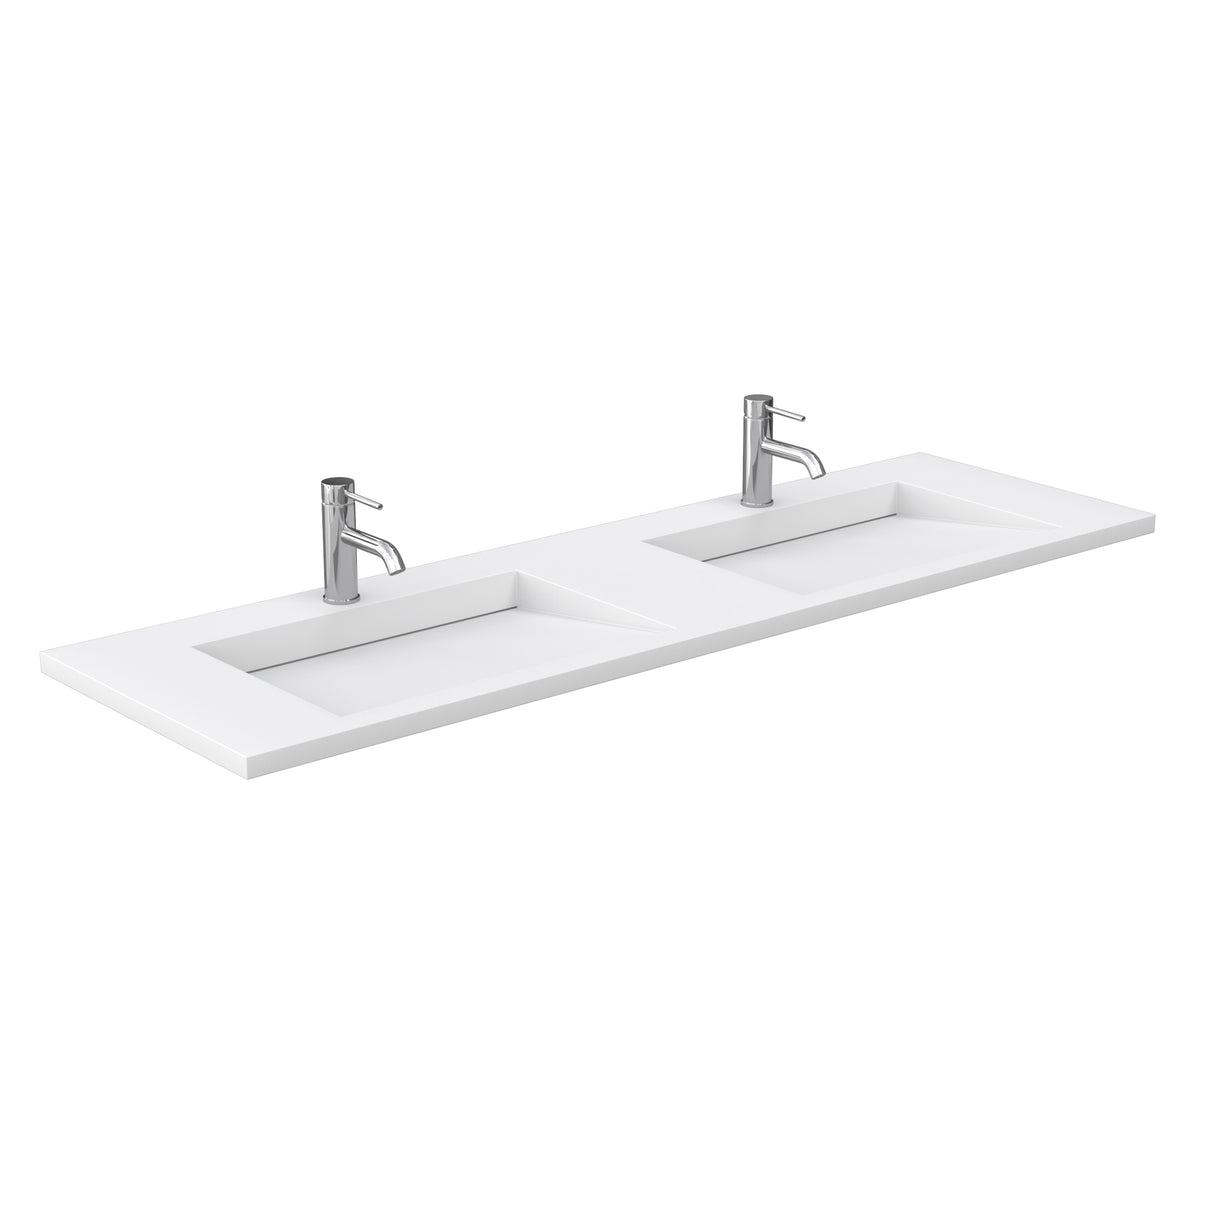 Miranda 72 Inch Double Bathroom Vanity in White 1.25 Inch Thick Matte White Solid Surface Countertop Integrated Sinks Matte Black Trim 70 Inch Mirror